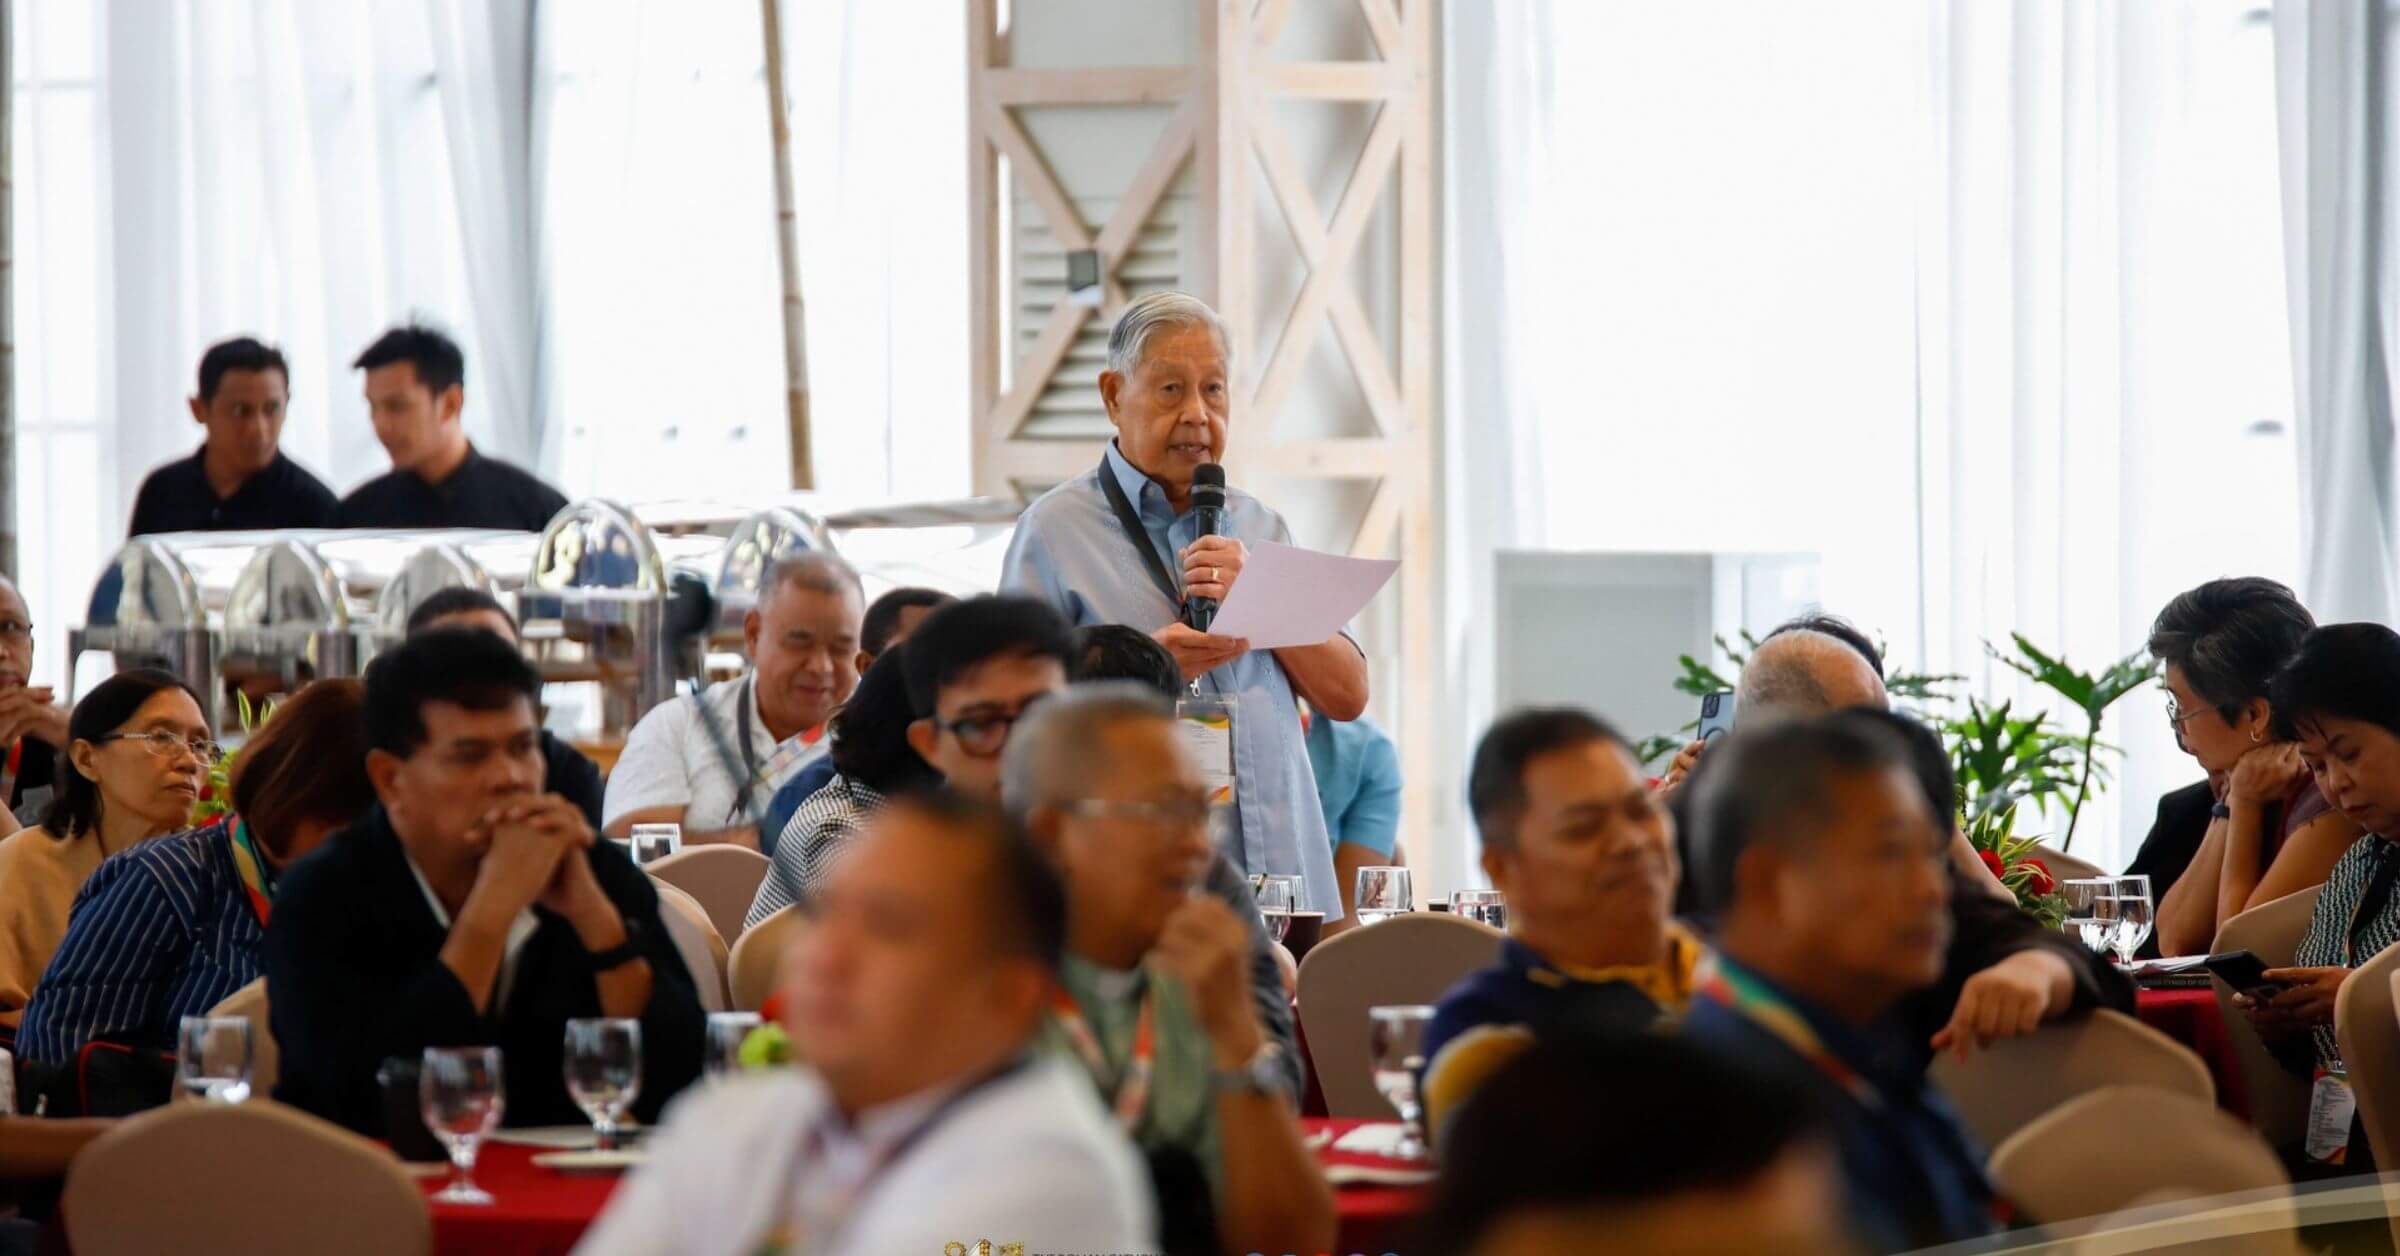 Retired Supreme Court Chief Justice Hilario Davide Jr. speaks out during the General Pastoral Assembly held last week to discuss the move to break up the Archdiocese of Cebu. (Photo from the official Archdiocese of Cebu Facebook page.)